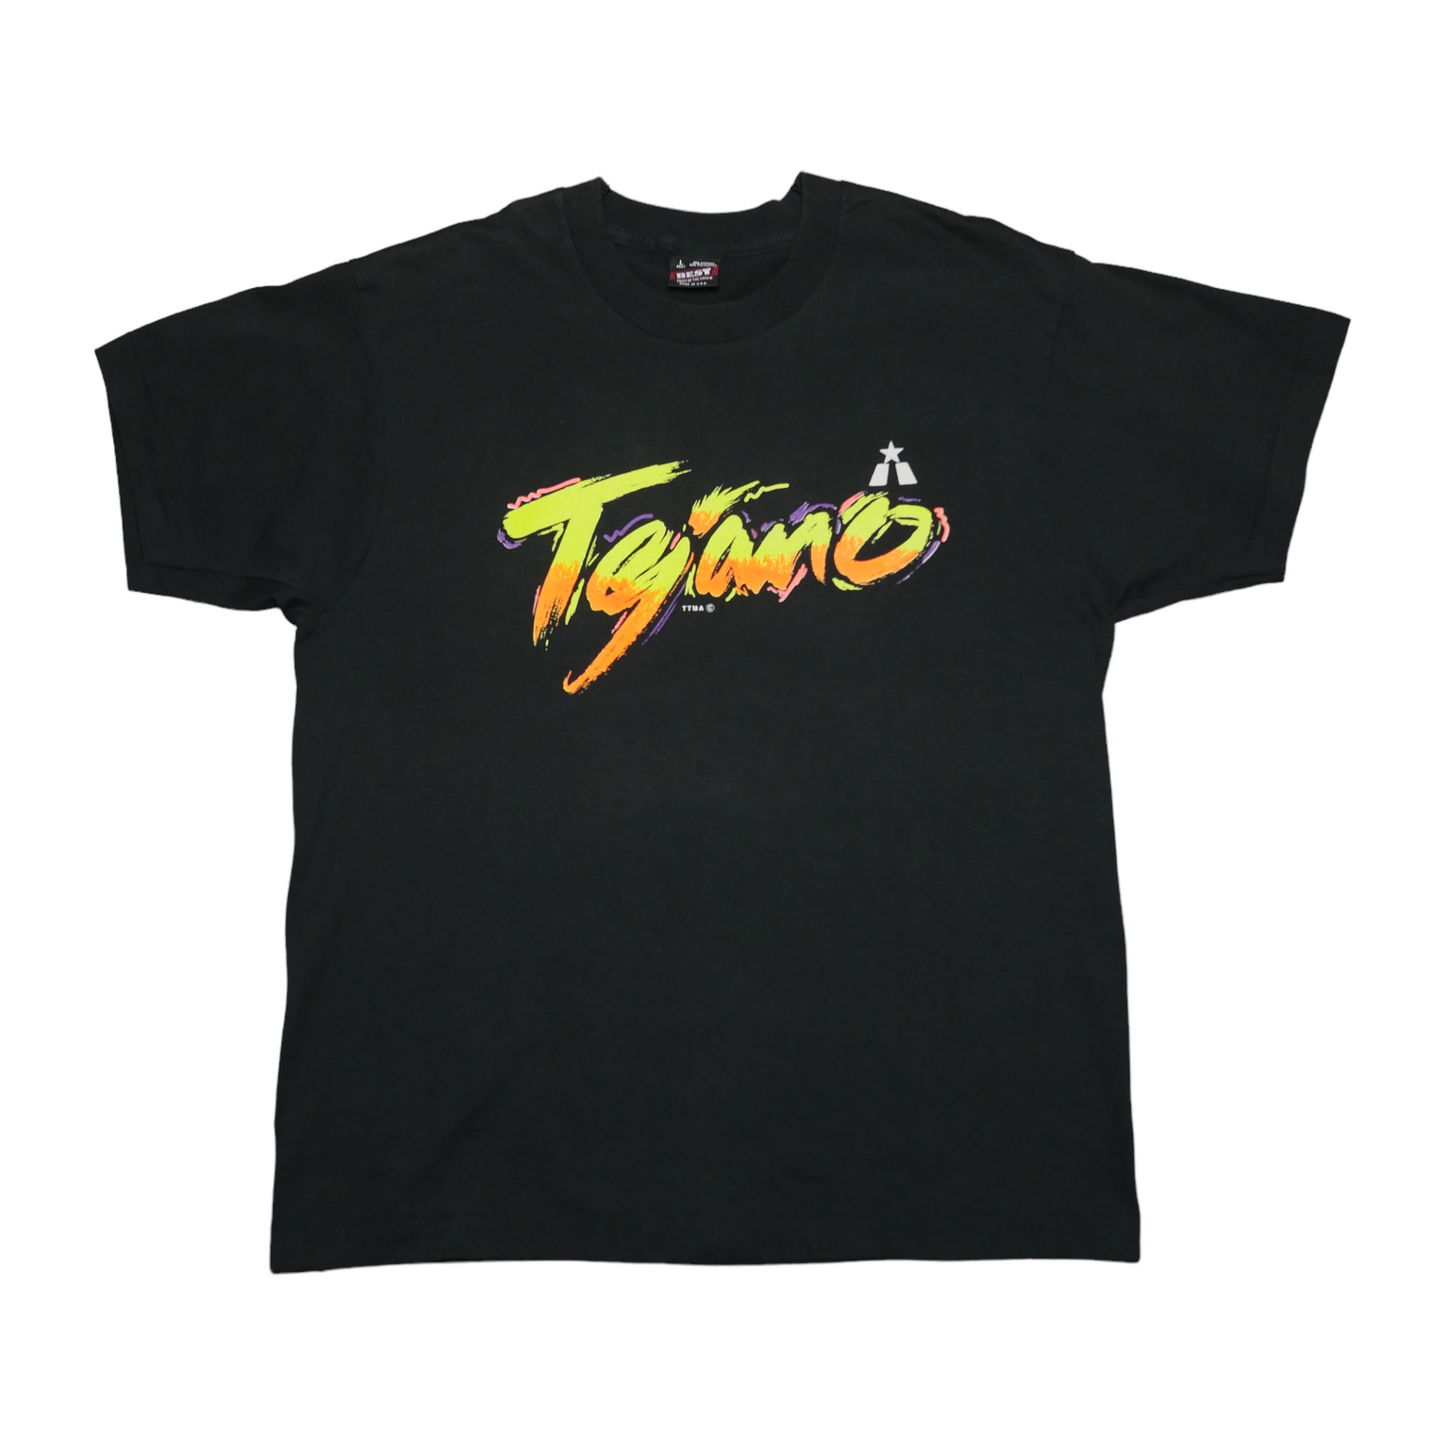 Tejano It's Not Only Music Shirt - Large